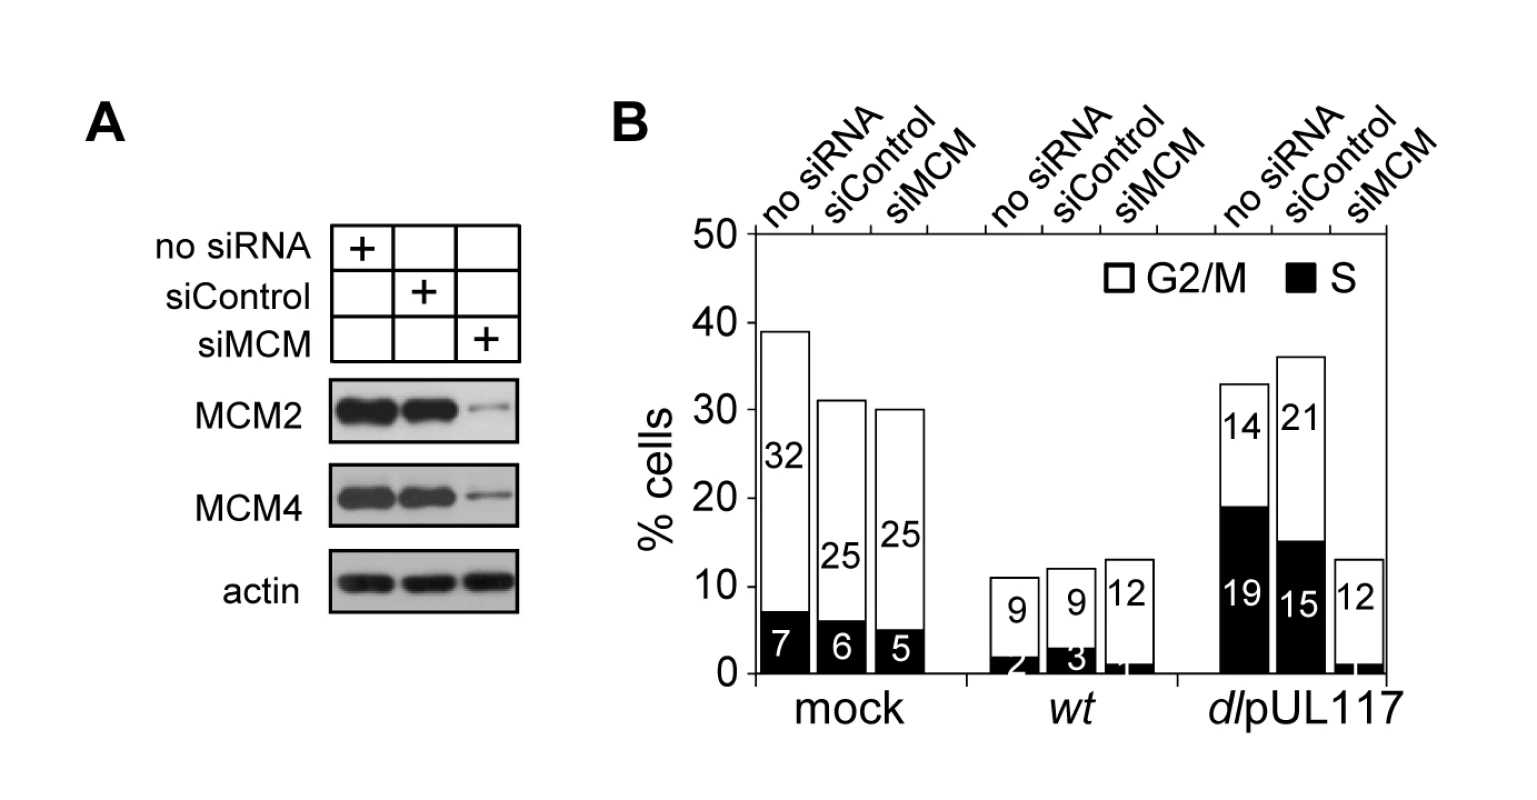 Knockdown of MCM2 and MCM4 restores the ability of pUL117-deficient virus to block host DNA synthesis.